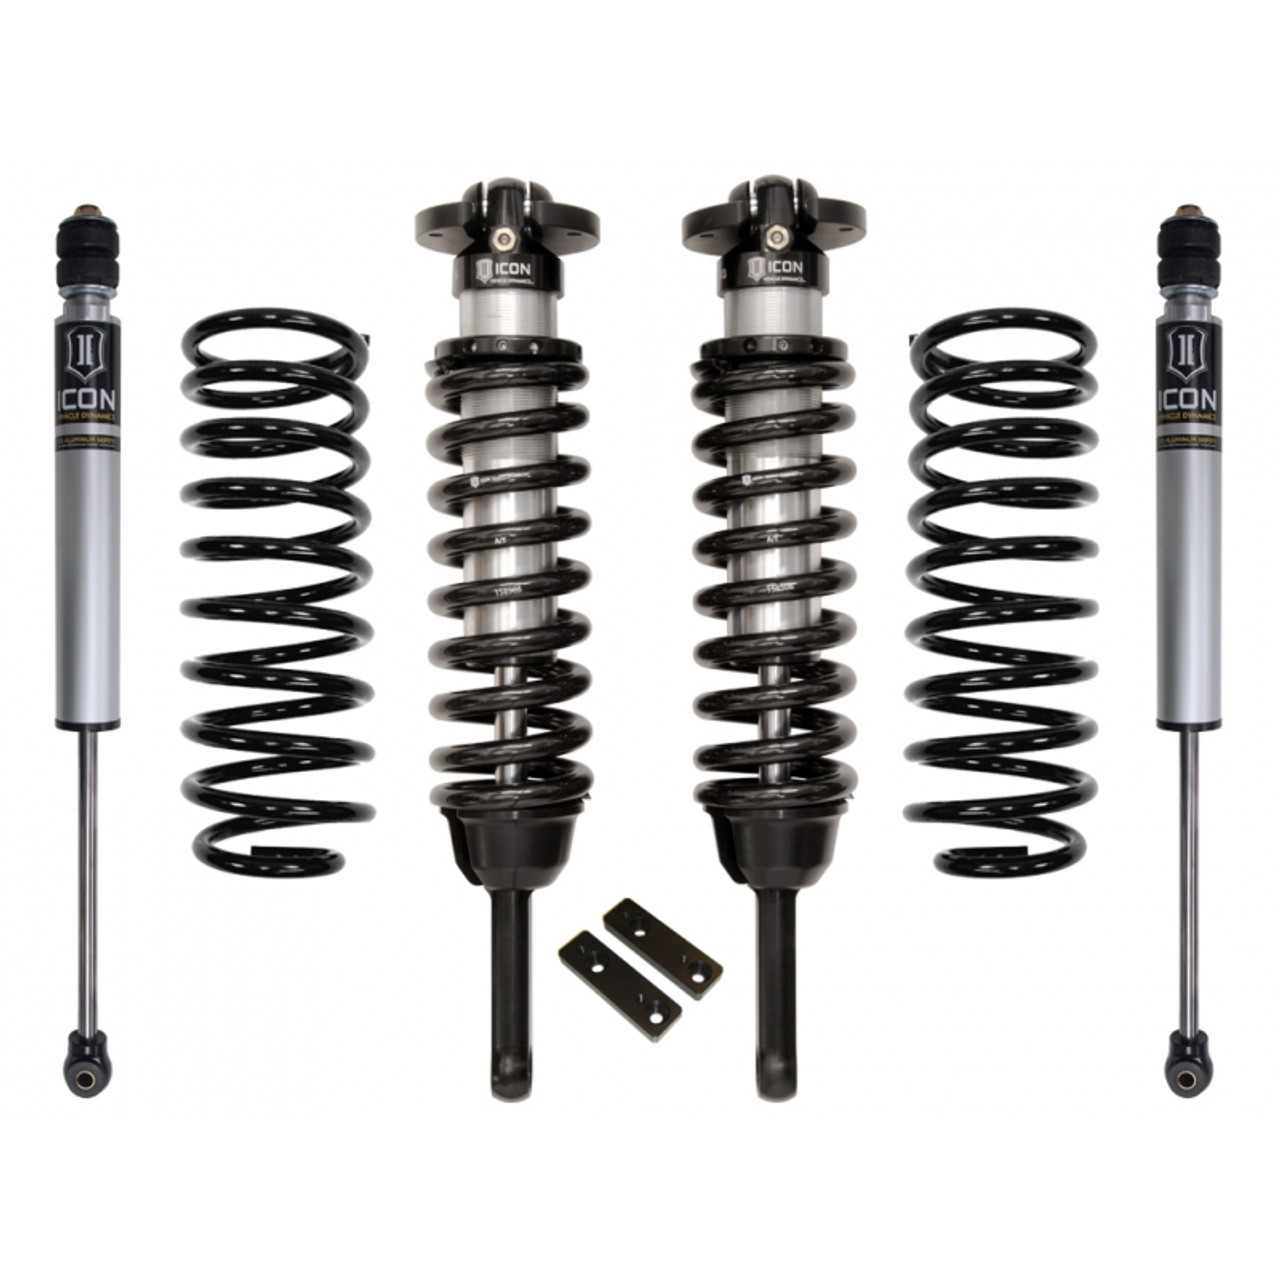 ICON Vehicle Dynamics K53061 0-3.5 Stage 1 Suspension for 2010-Up Toyota 4Runner